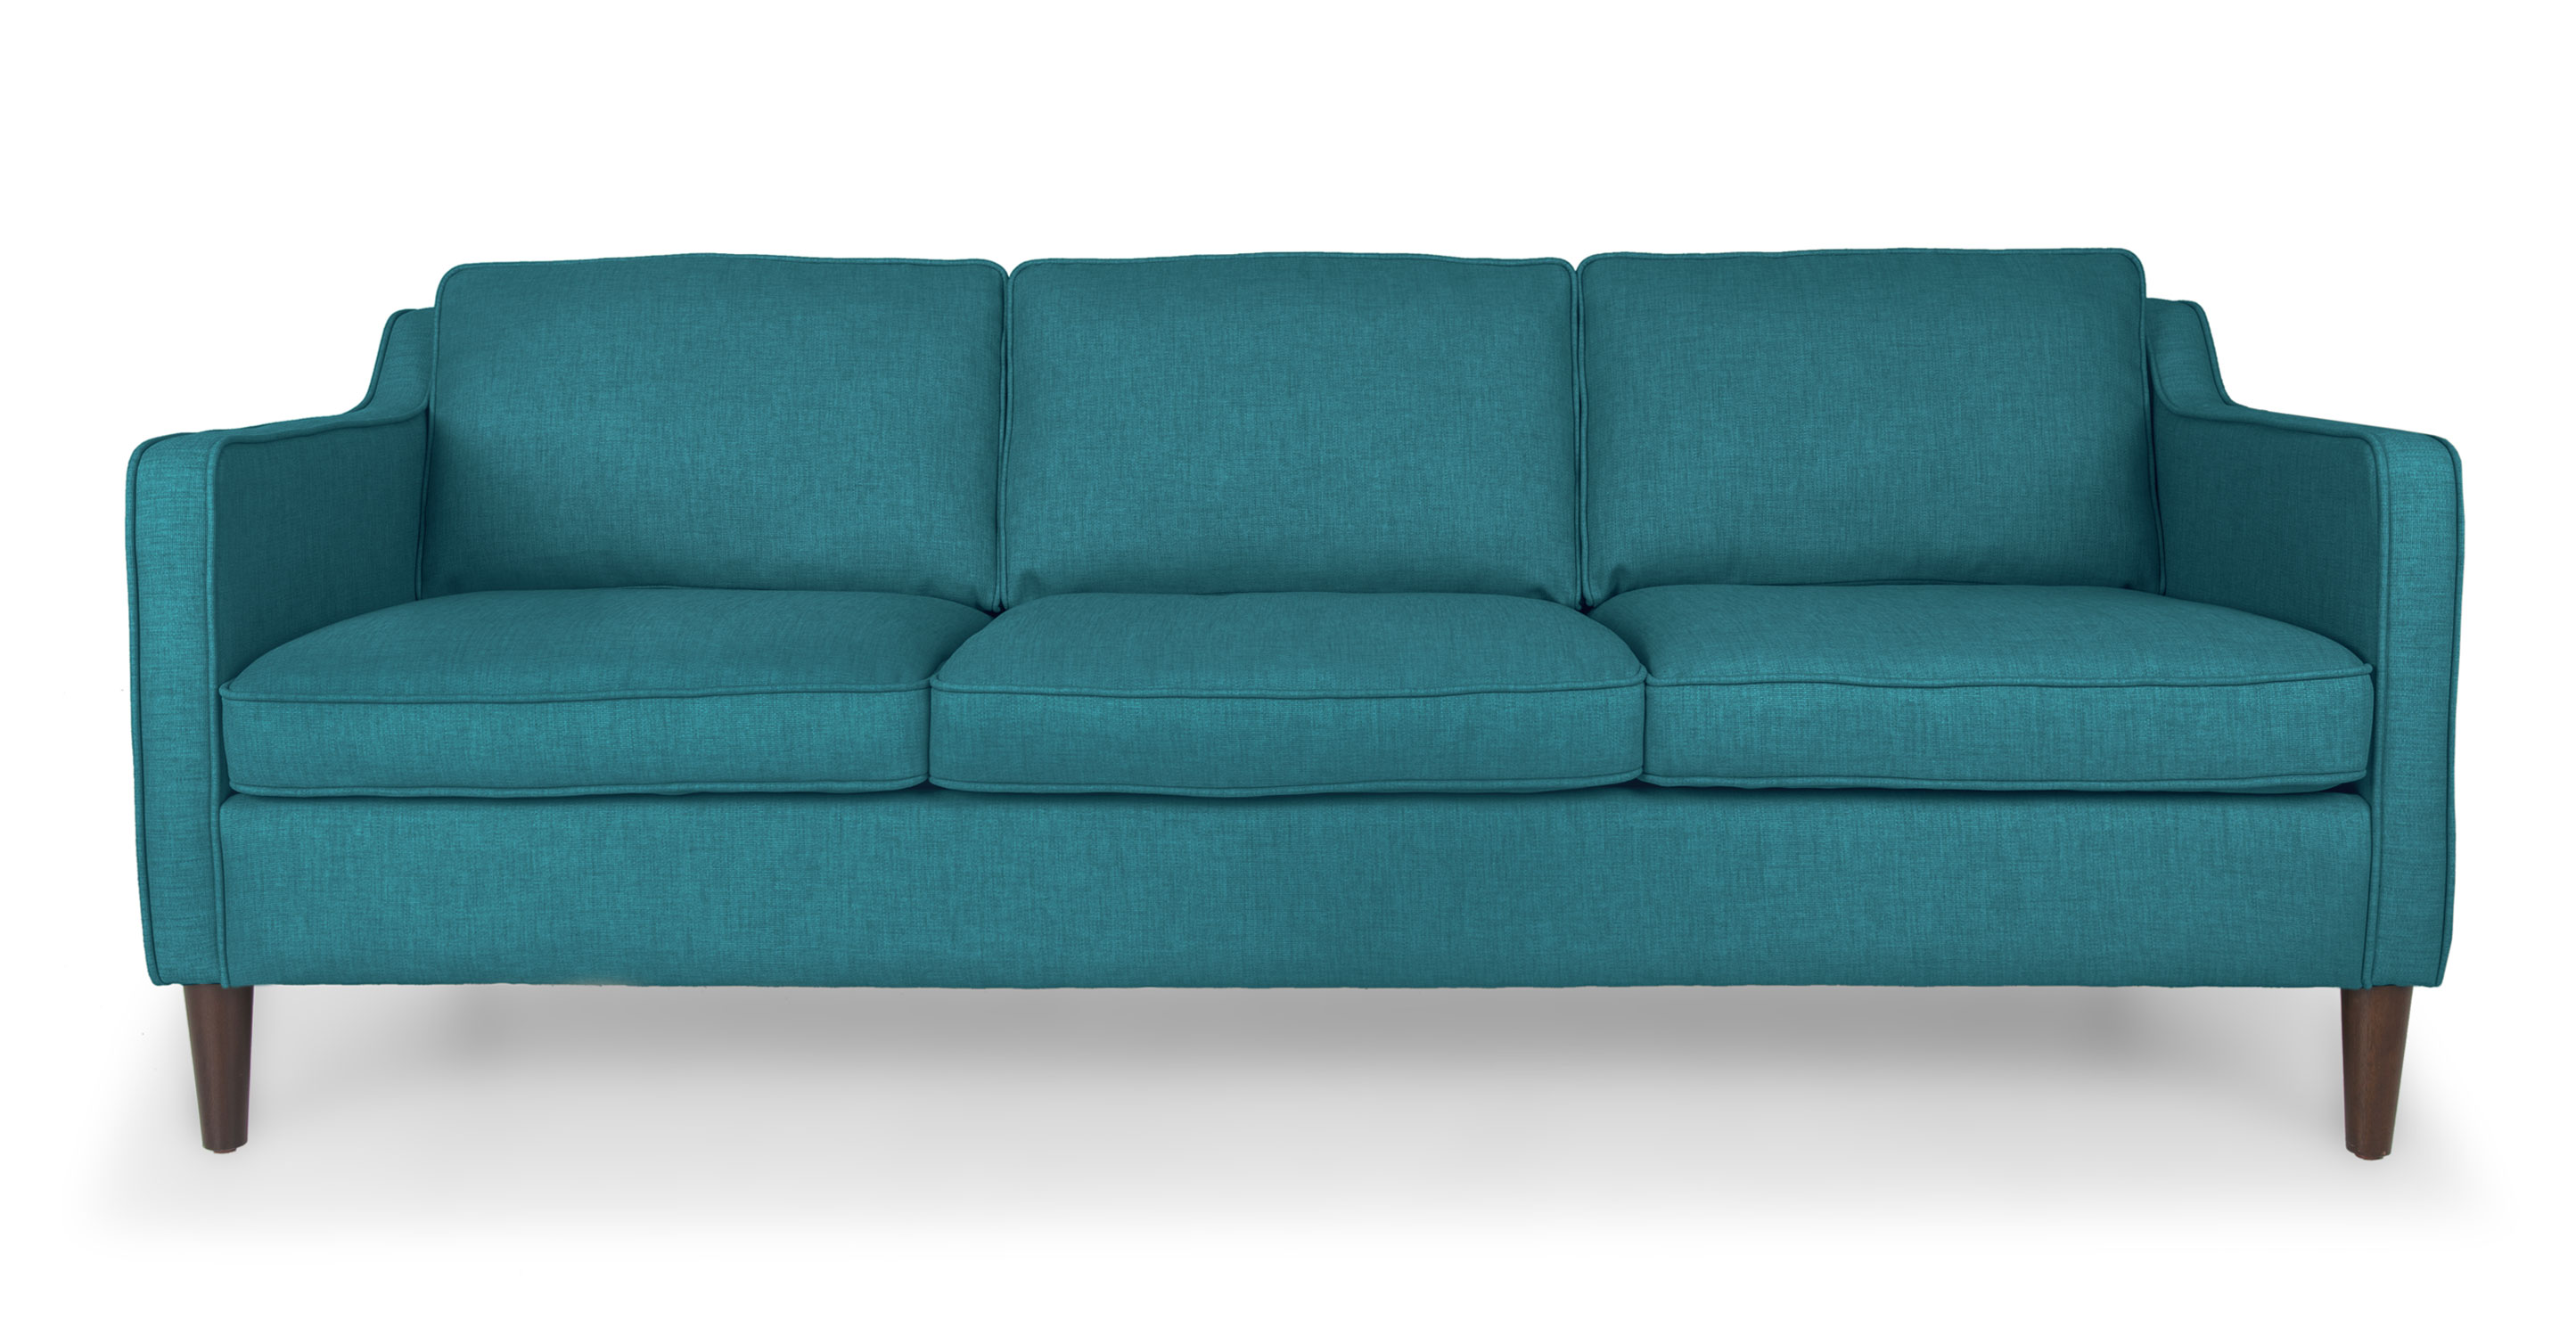 Cherie Ocean Teal Sofa - Sofas - Articles |  modern, mid-century and SYXXUDG